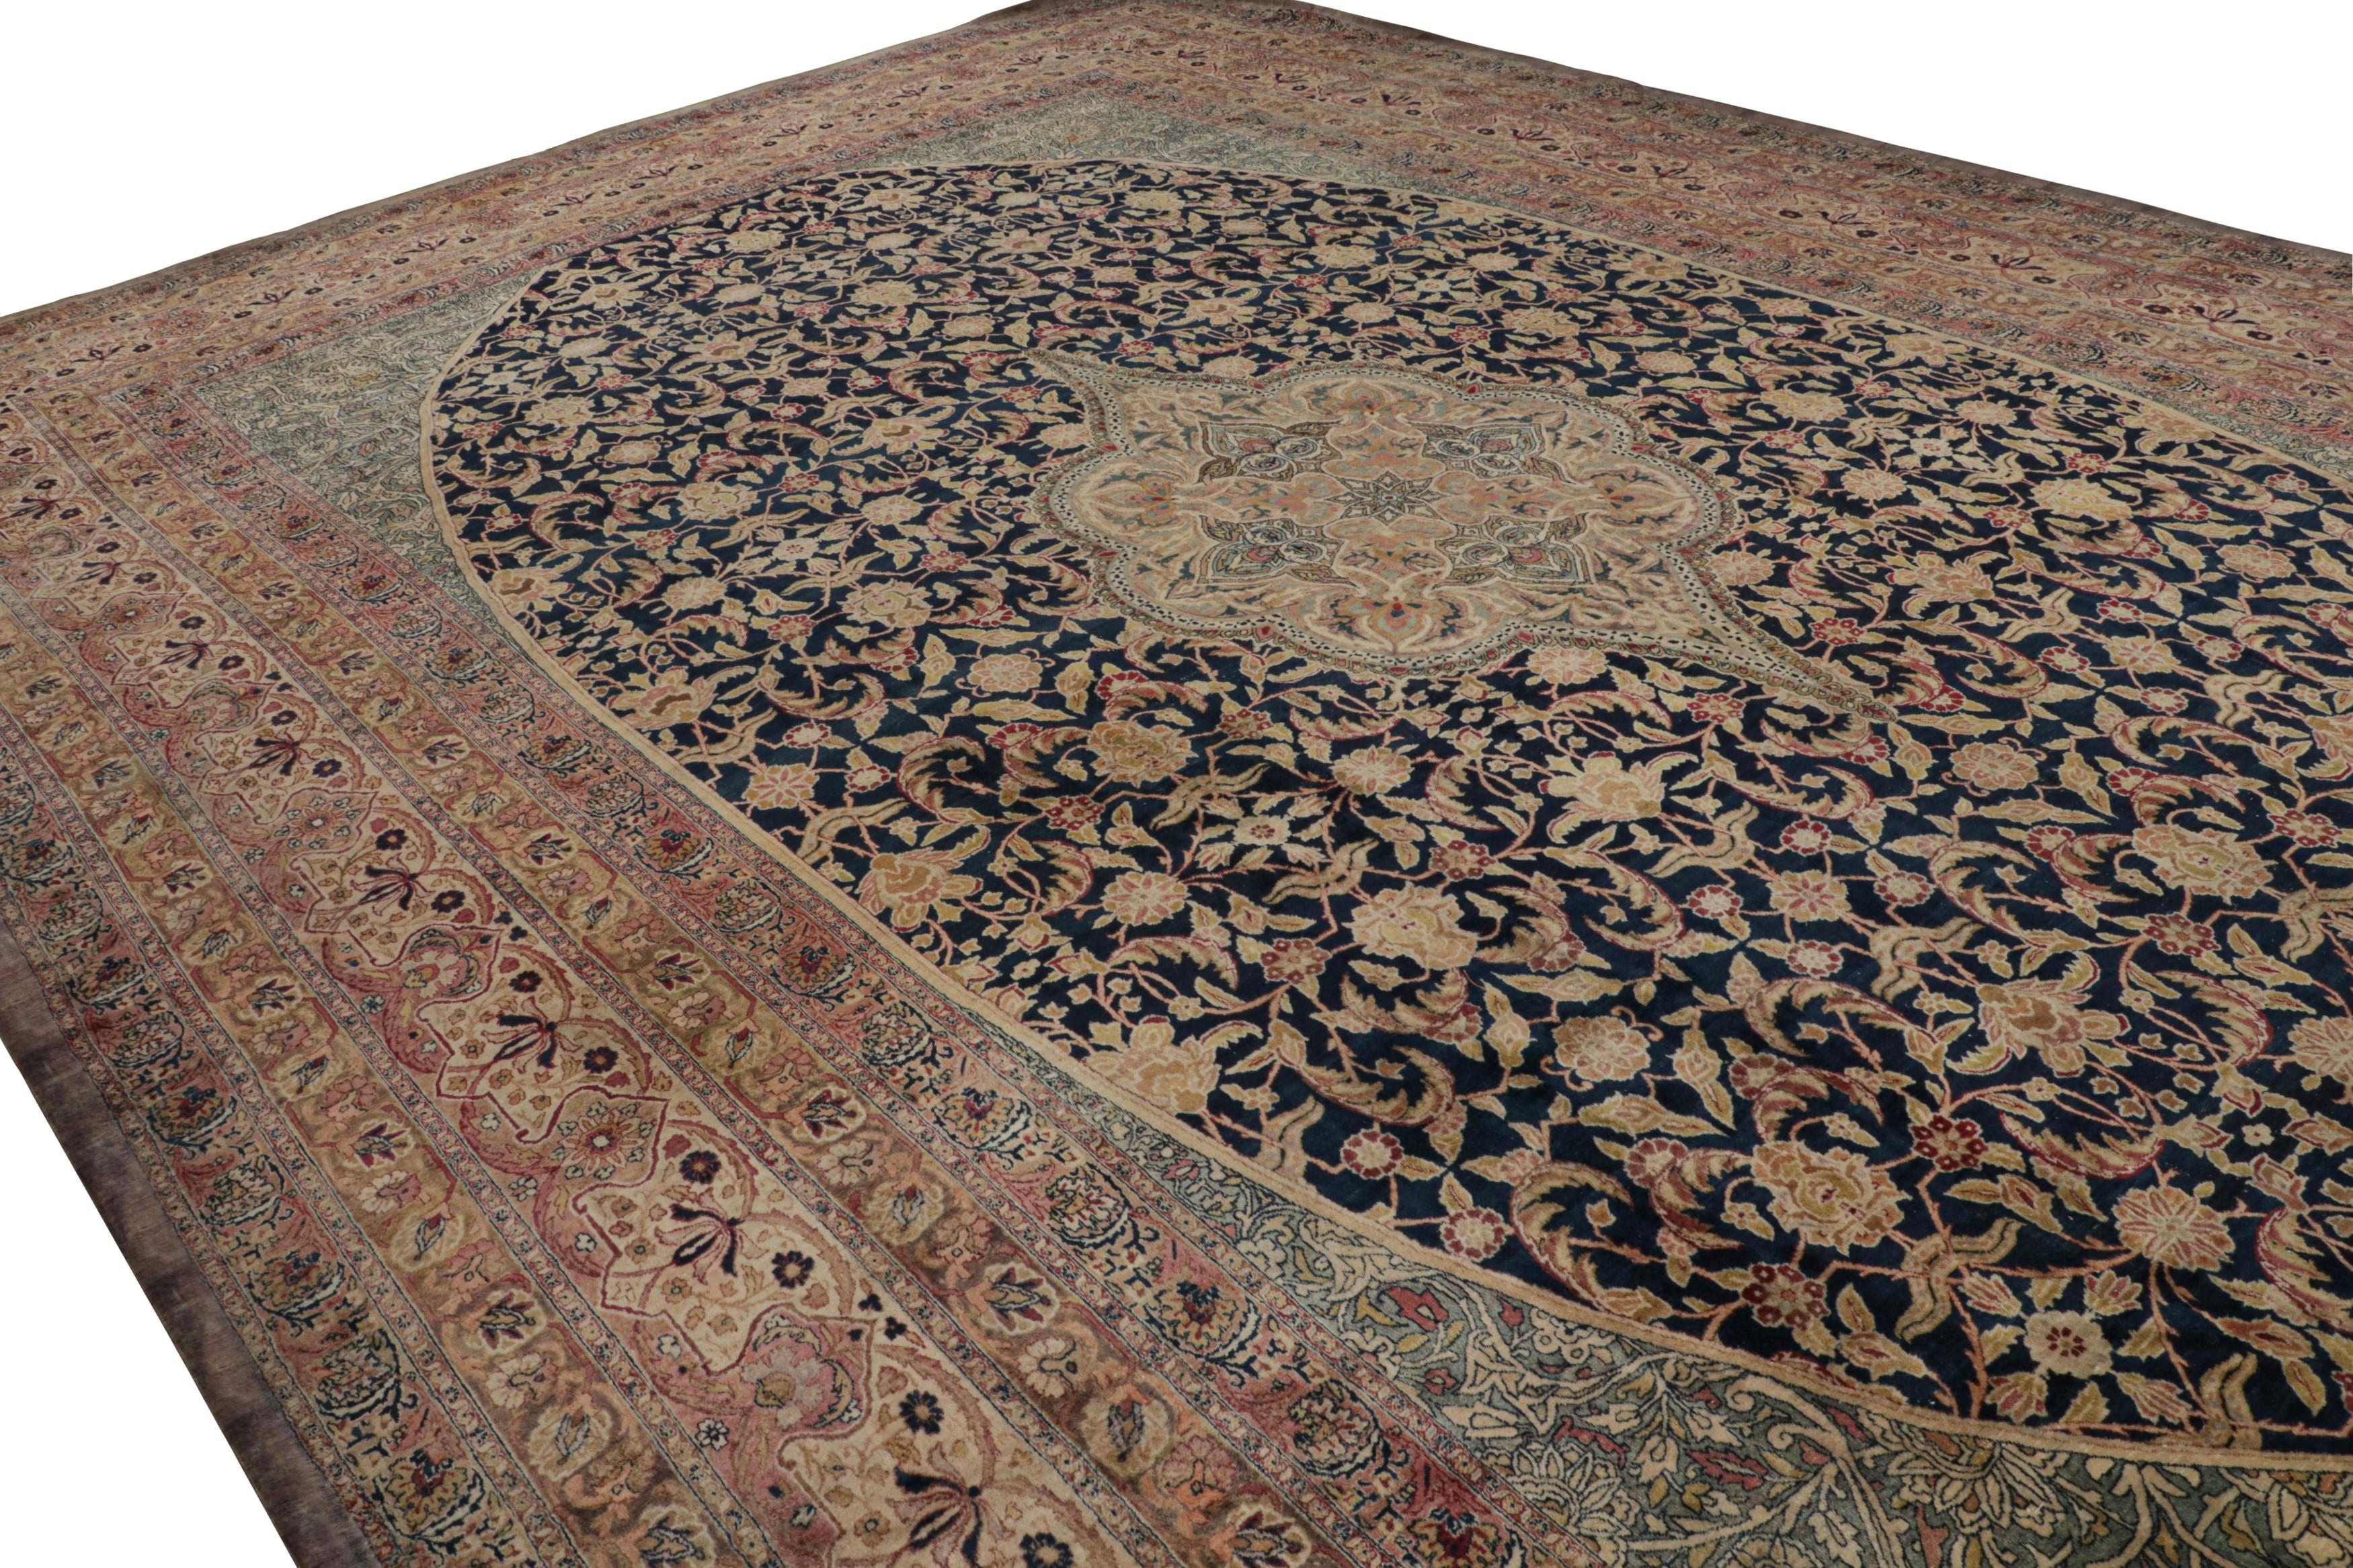 Handwoven in wool, this 15x23 antique Persian Kerman Lavar rug originating circa 1920-1930, is a masterpiece from one of the most sought-after weaving traditions in Persian city rugs. 

On the Design: 

Admirers of the craft will appreciate this